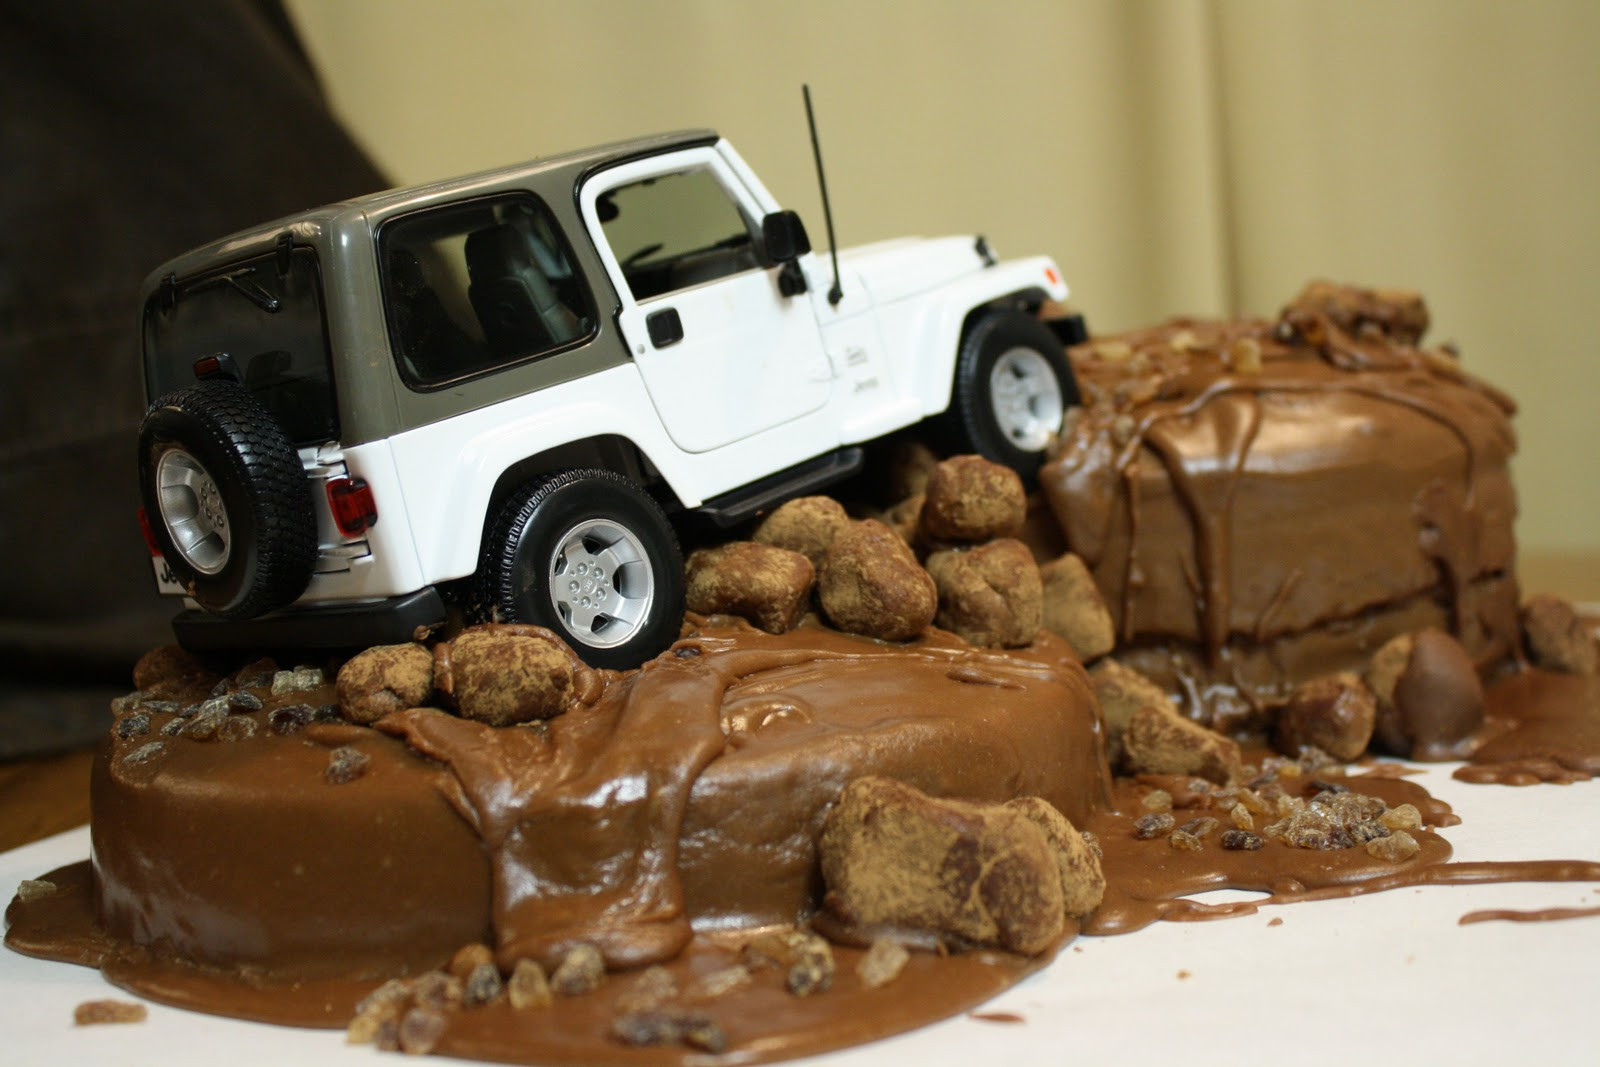 Jeep Birthday Cake
 The Traveling Spoon Dabbling in Decorating Jeep Cake